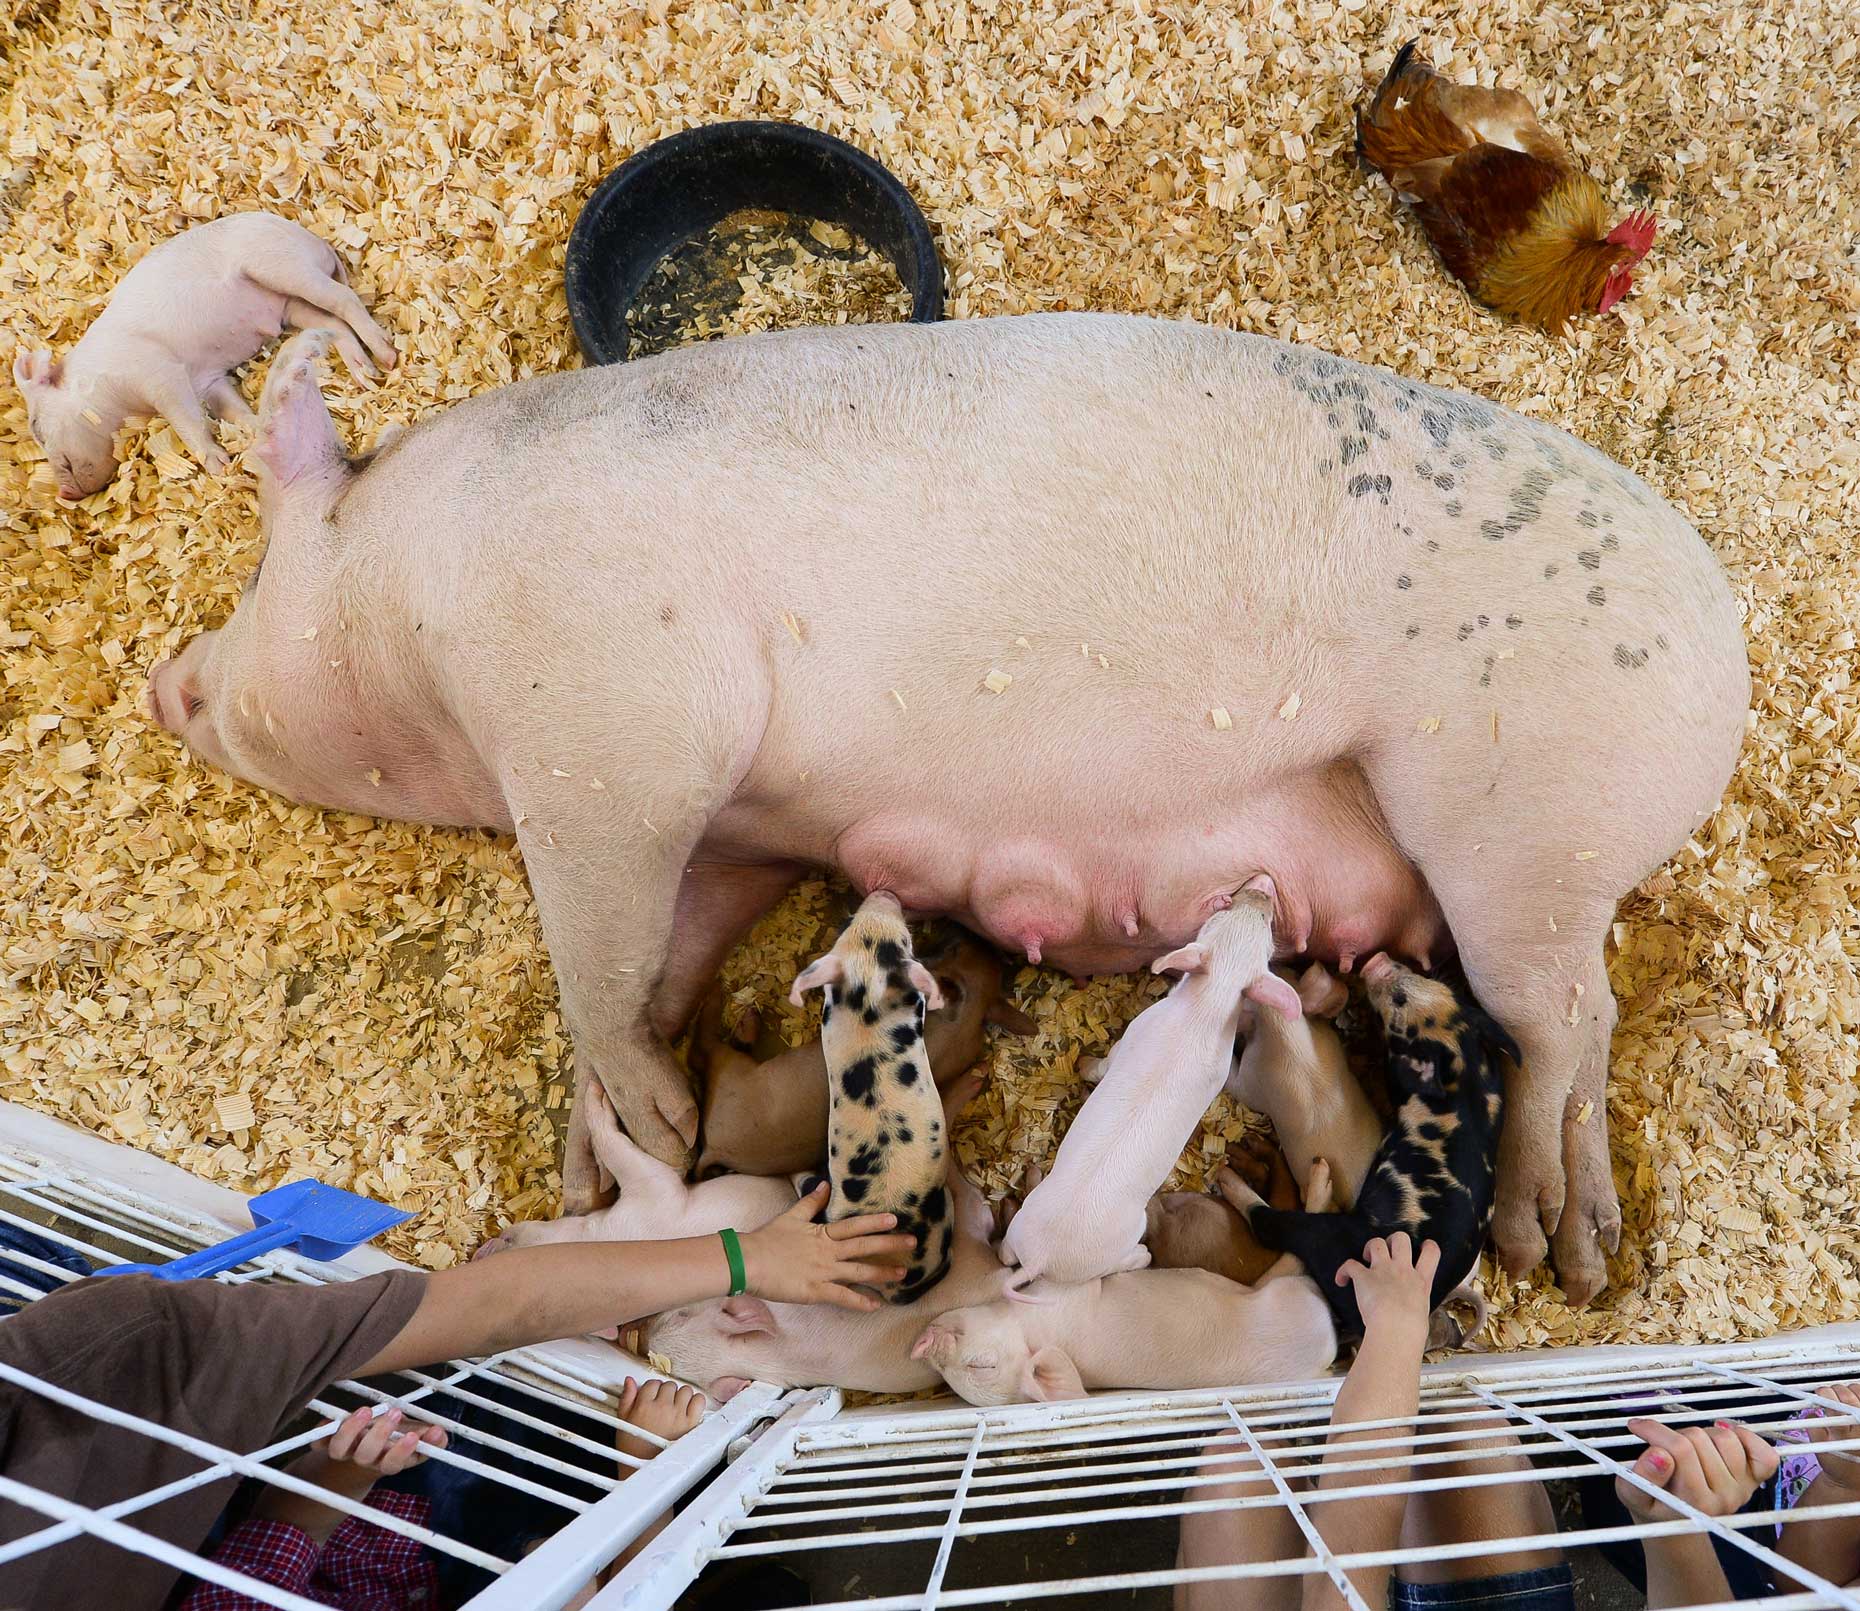 Petting zoo at The State Fair of Texas. Photography by Kevin Brown